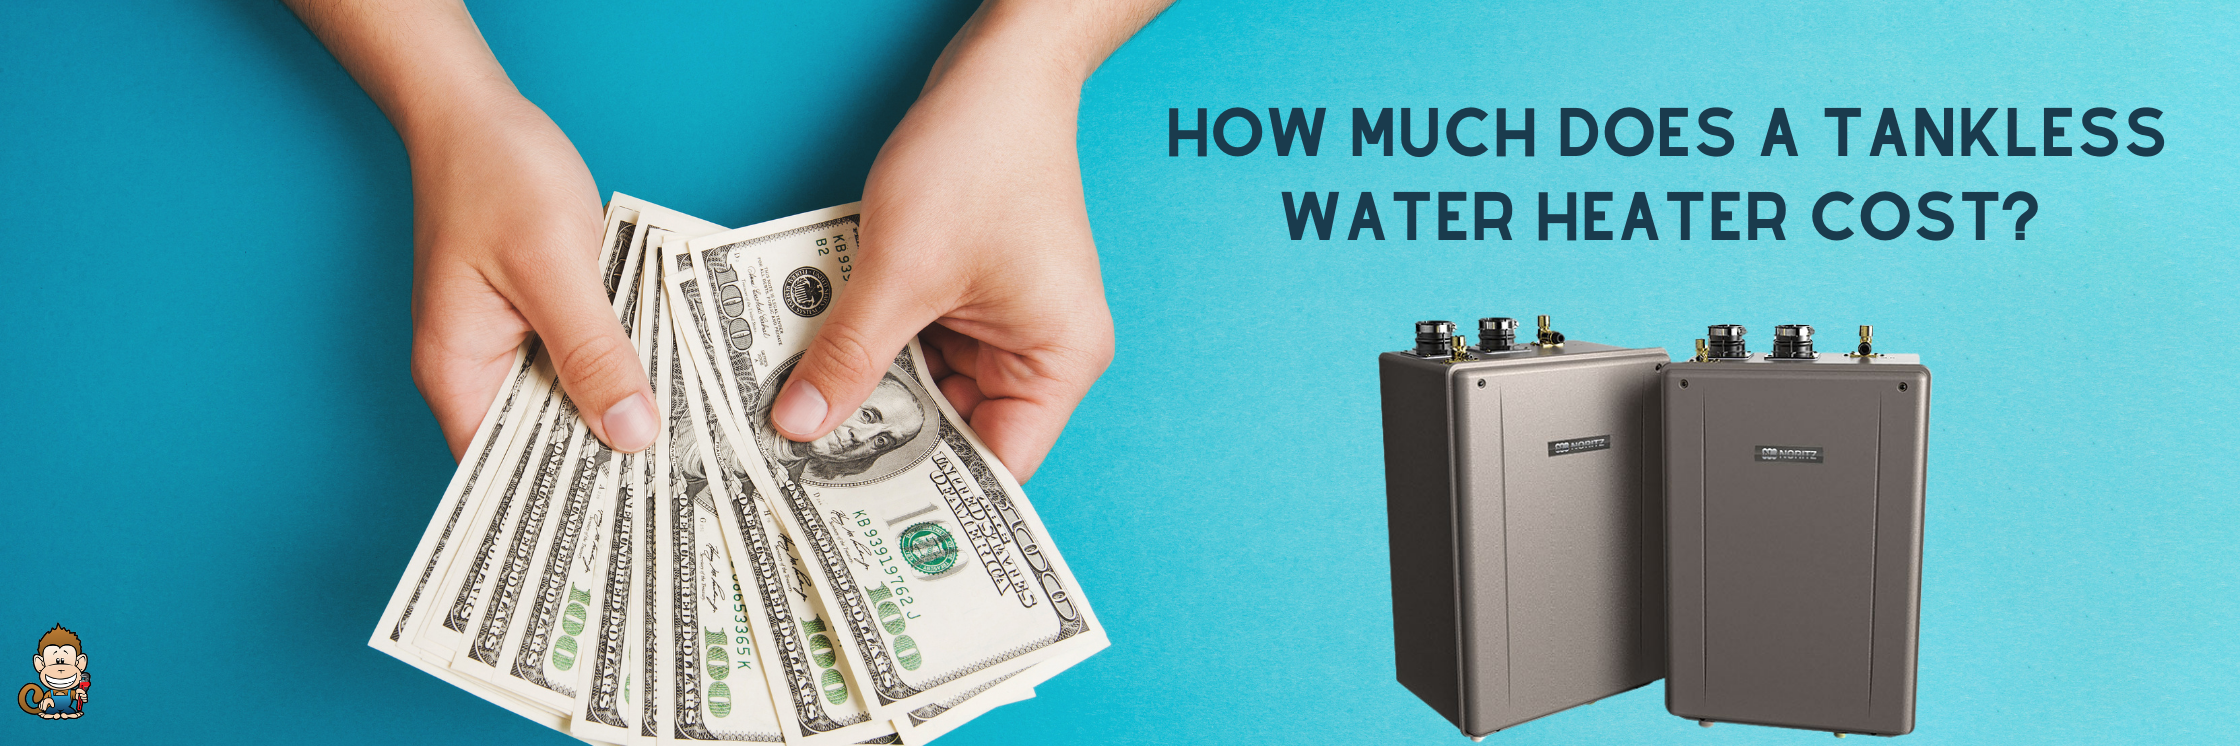 How Much Does a Tankless Water Heater Cost?